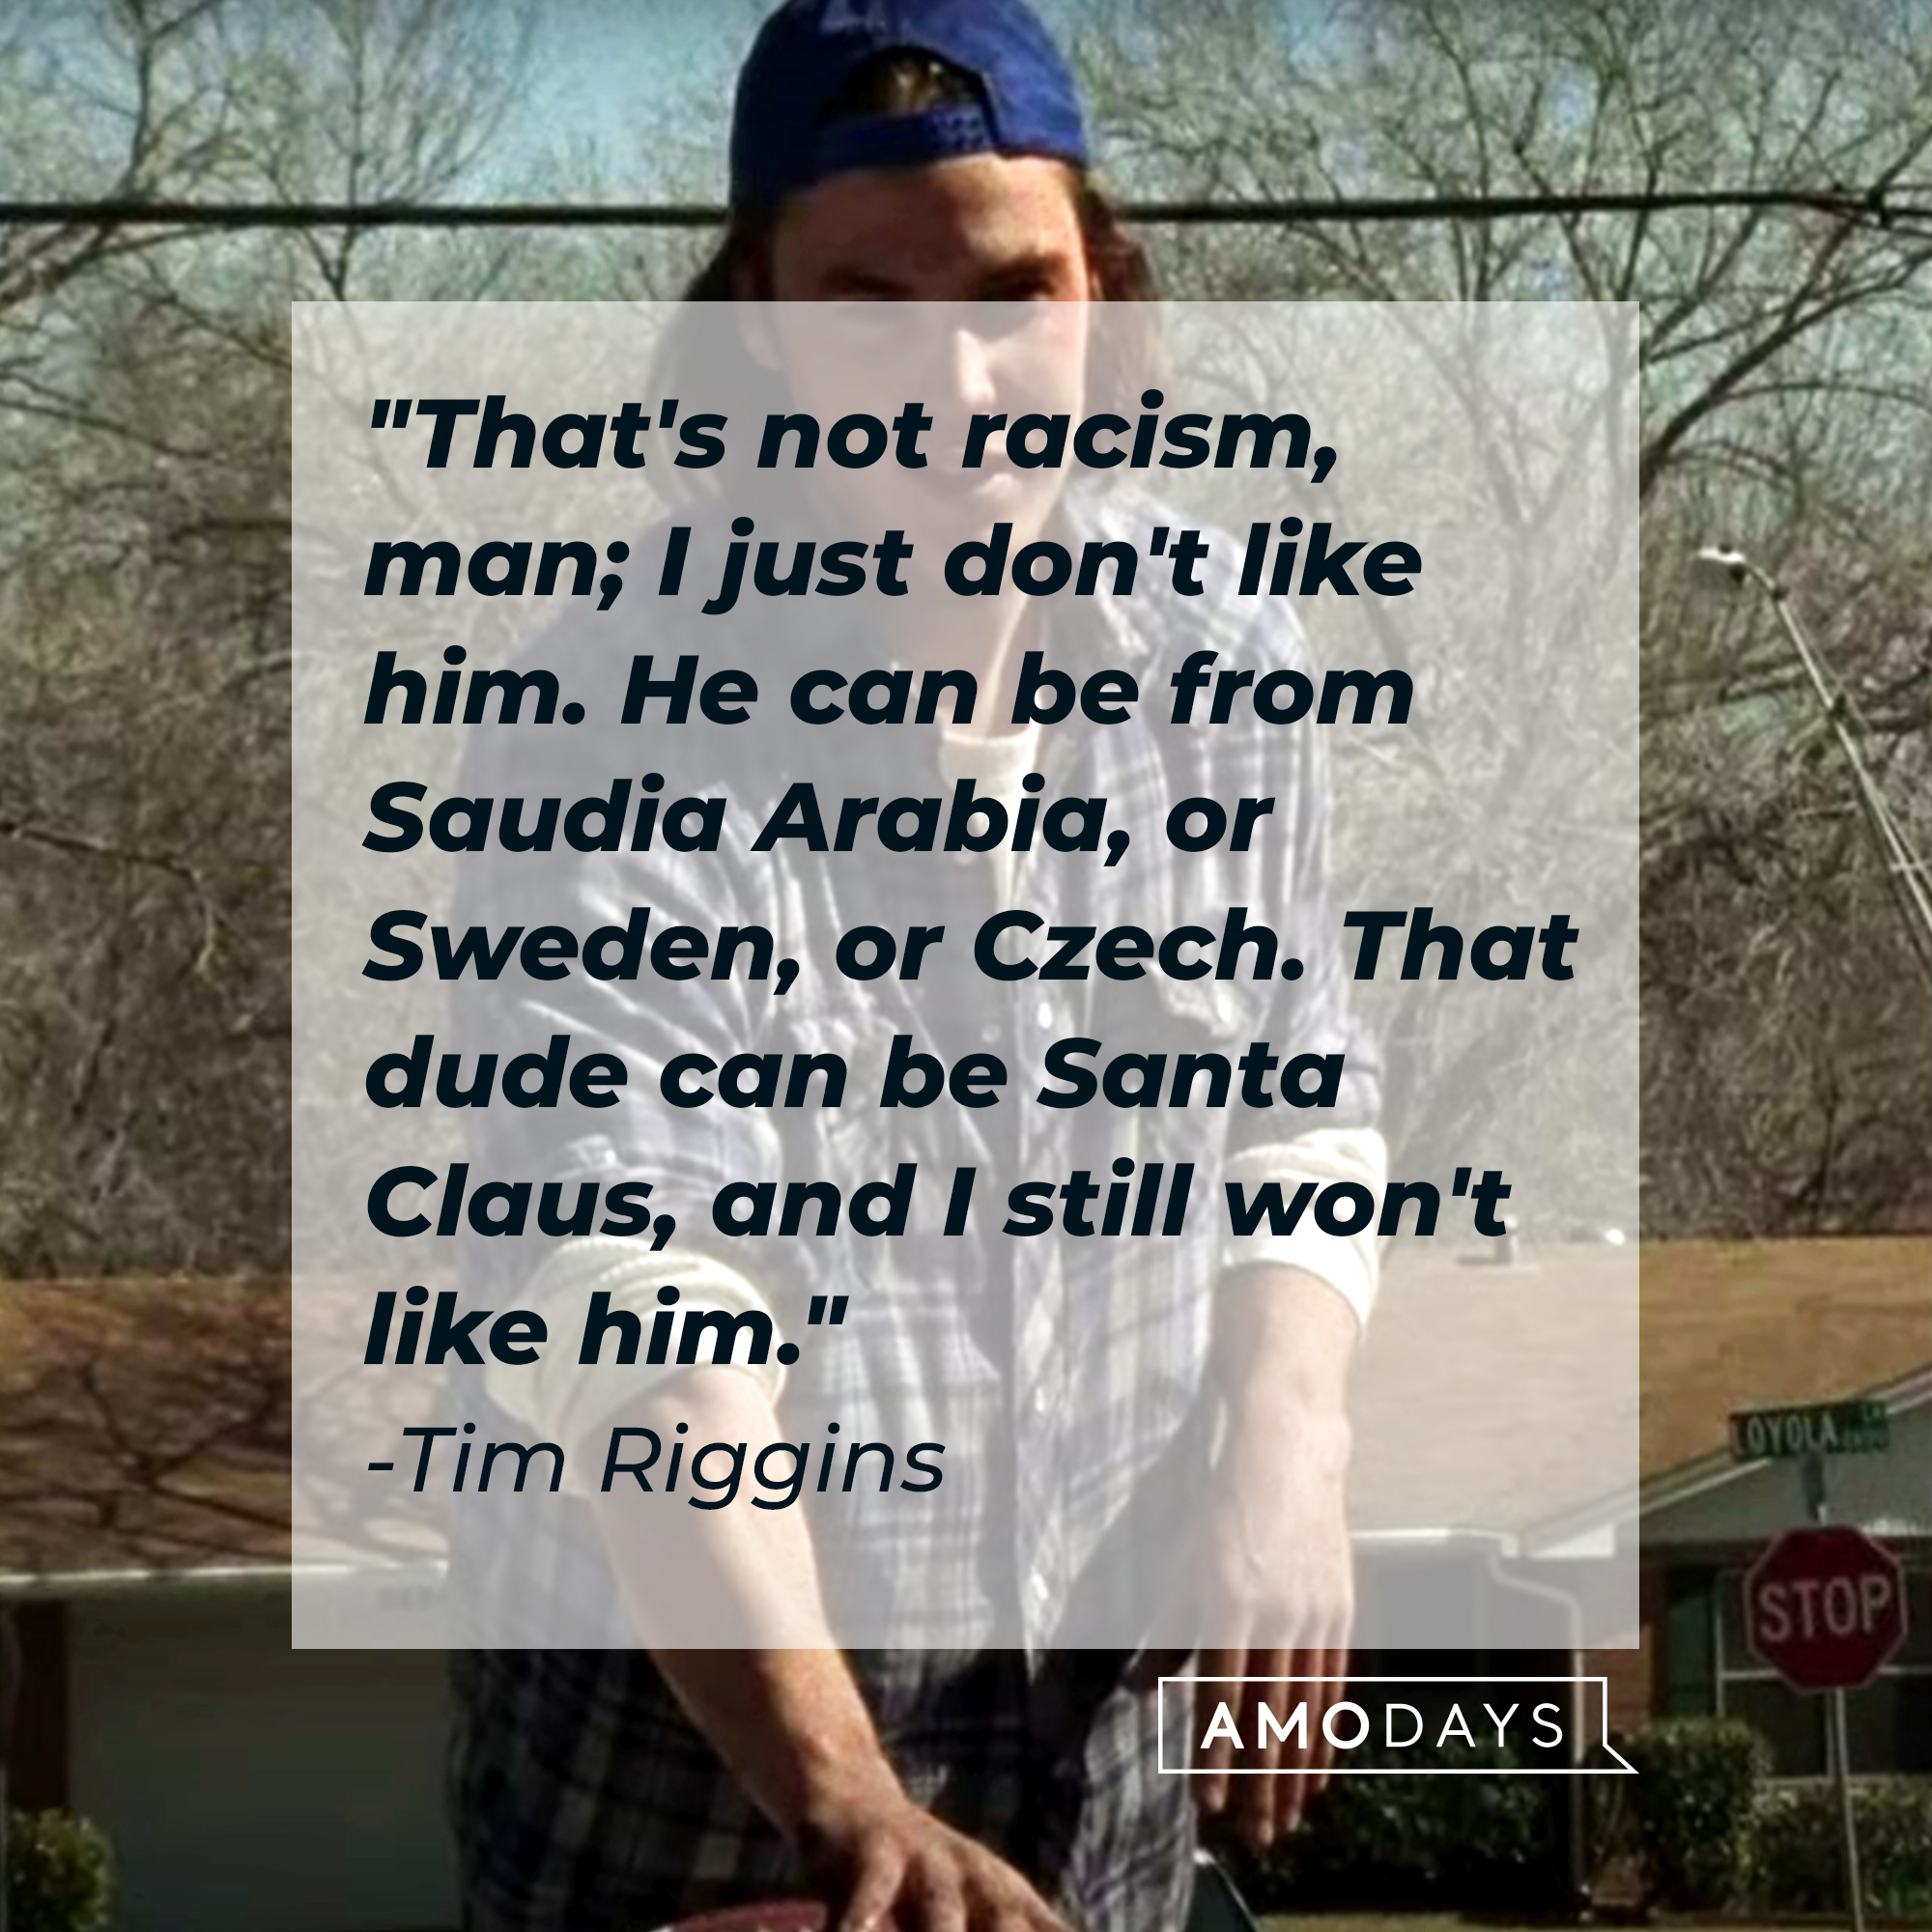 Tim Riggins' quote, "That's not racism, man; I just don't like him. He can be from Saudia Arabia, or Sweden, or Czech. That dude can be Santa Claus, and I still won't like him."  | Source: Facebook/fridaynightlights